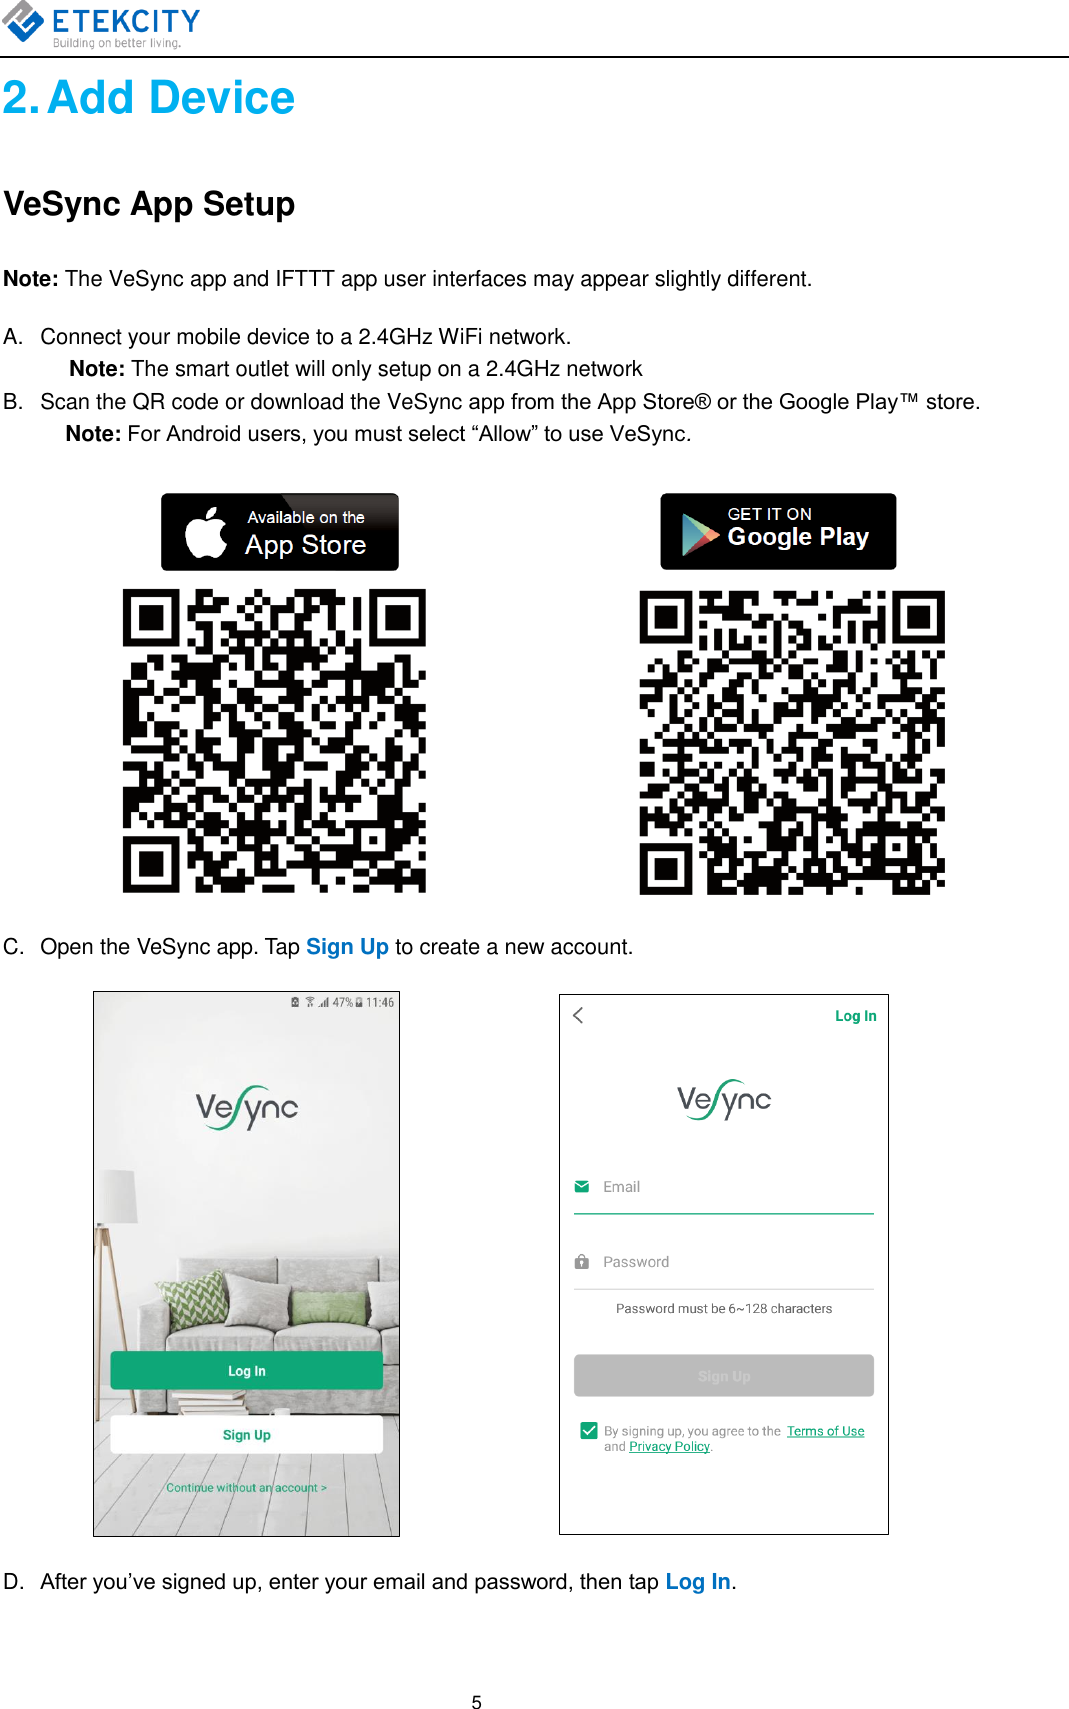    5 2. Add Device VeSync App Setup Note: The VeSync app and IFTTT app user interfaces may appear slightly different. A.  Connect your mobile device to a 2.4GHz WiFi network. Note: The smart outlet will only setup on a 2.4GHz network B.  Scan the QR code or download the VeSync app from the App Store® or the Google Play™ store.   Note: For Android users, you must select “Allow” to use VeSync.                                                            C.  Open the VeSync app. Tap Sign Up to create a new account.                 D. After you’ve signed up, enter your email and password, then tap Log In. 